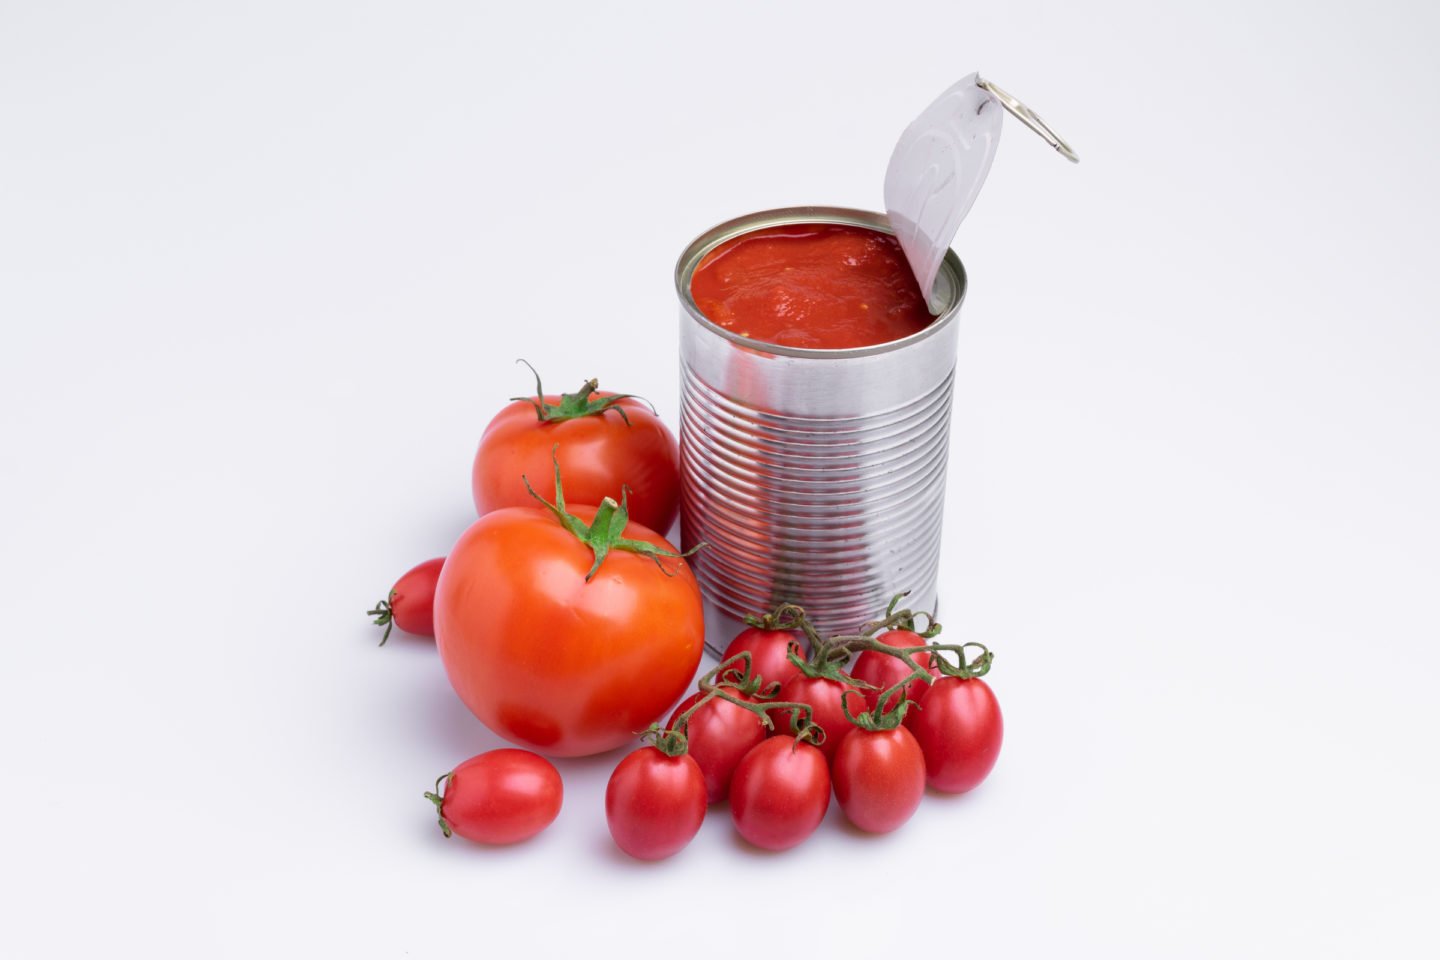 tomato juice substitute for red wine